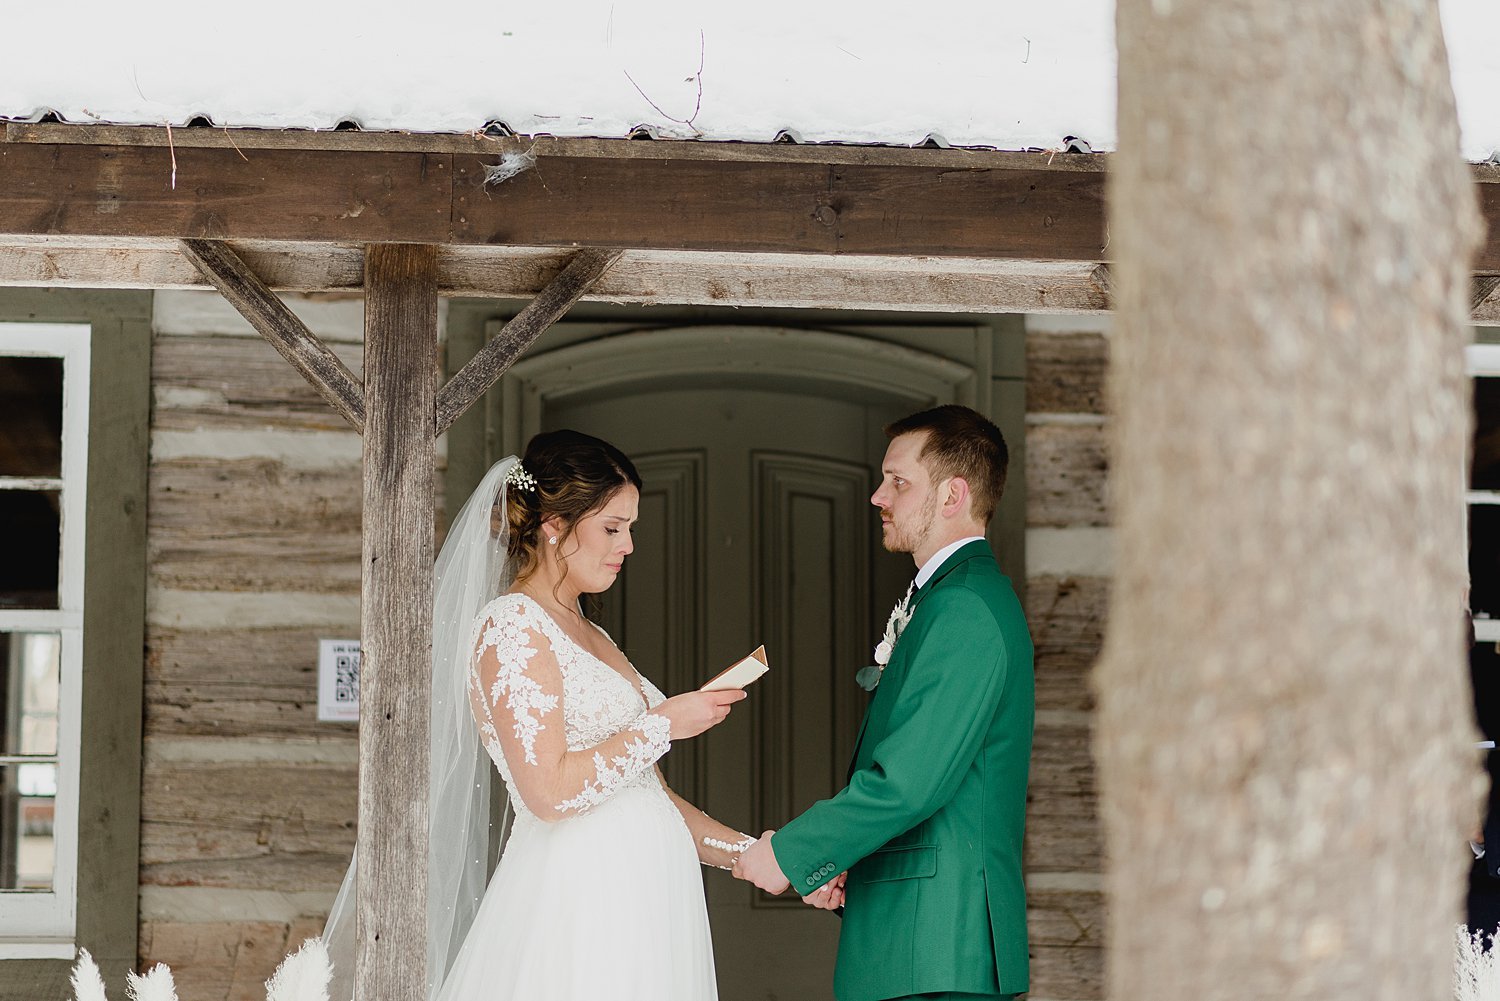 Intimate Winter Elopement at O'Hara Mill Homestead in Madoc, Ontario | Prince Edward County Wedding Photographer | Holly McMurter Photographs_0018.jpg